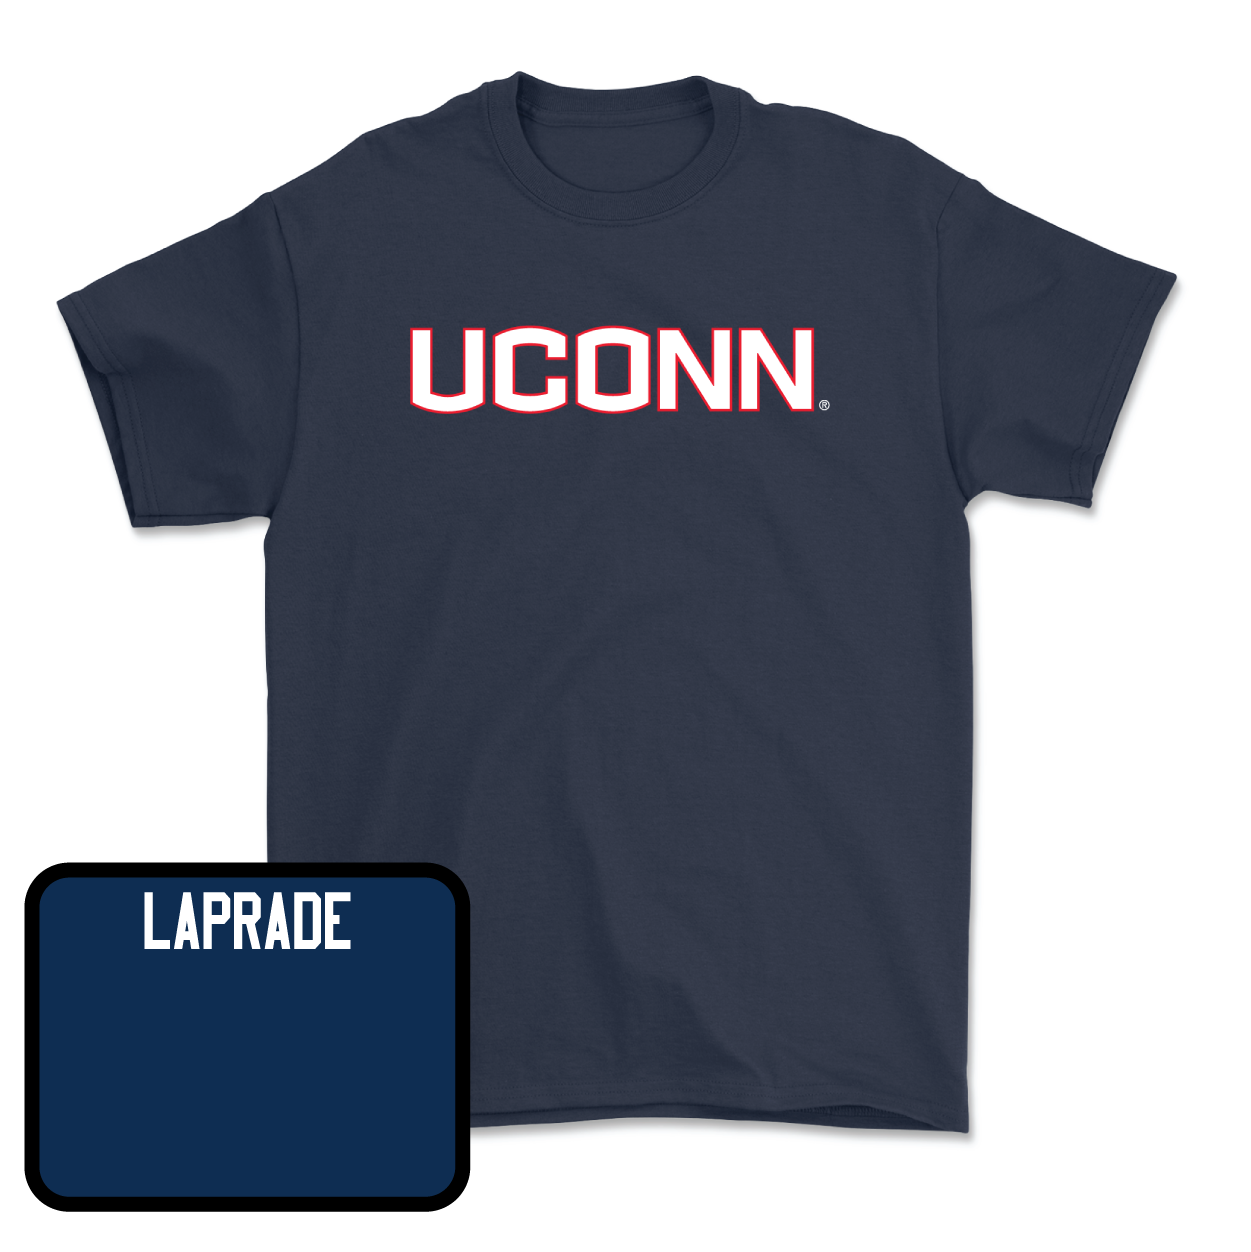 Navy Women's Rowing UConn Tee Large / Madelyn Laprade